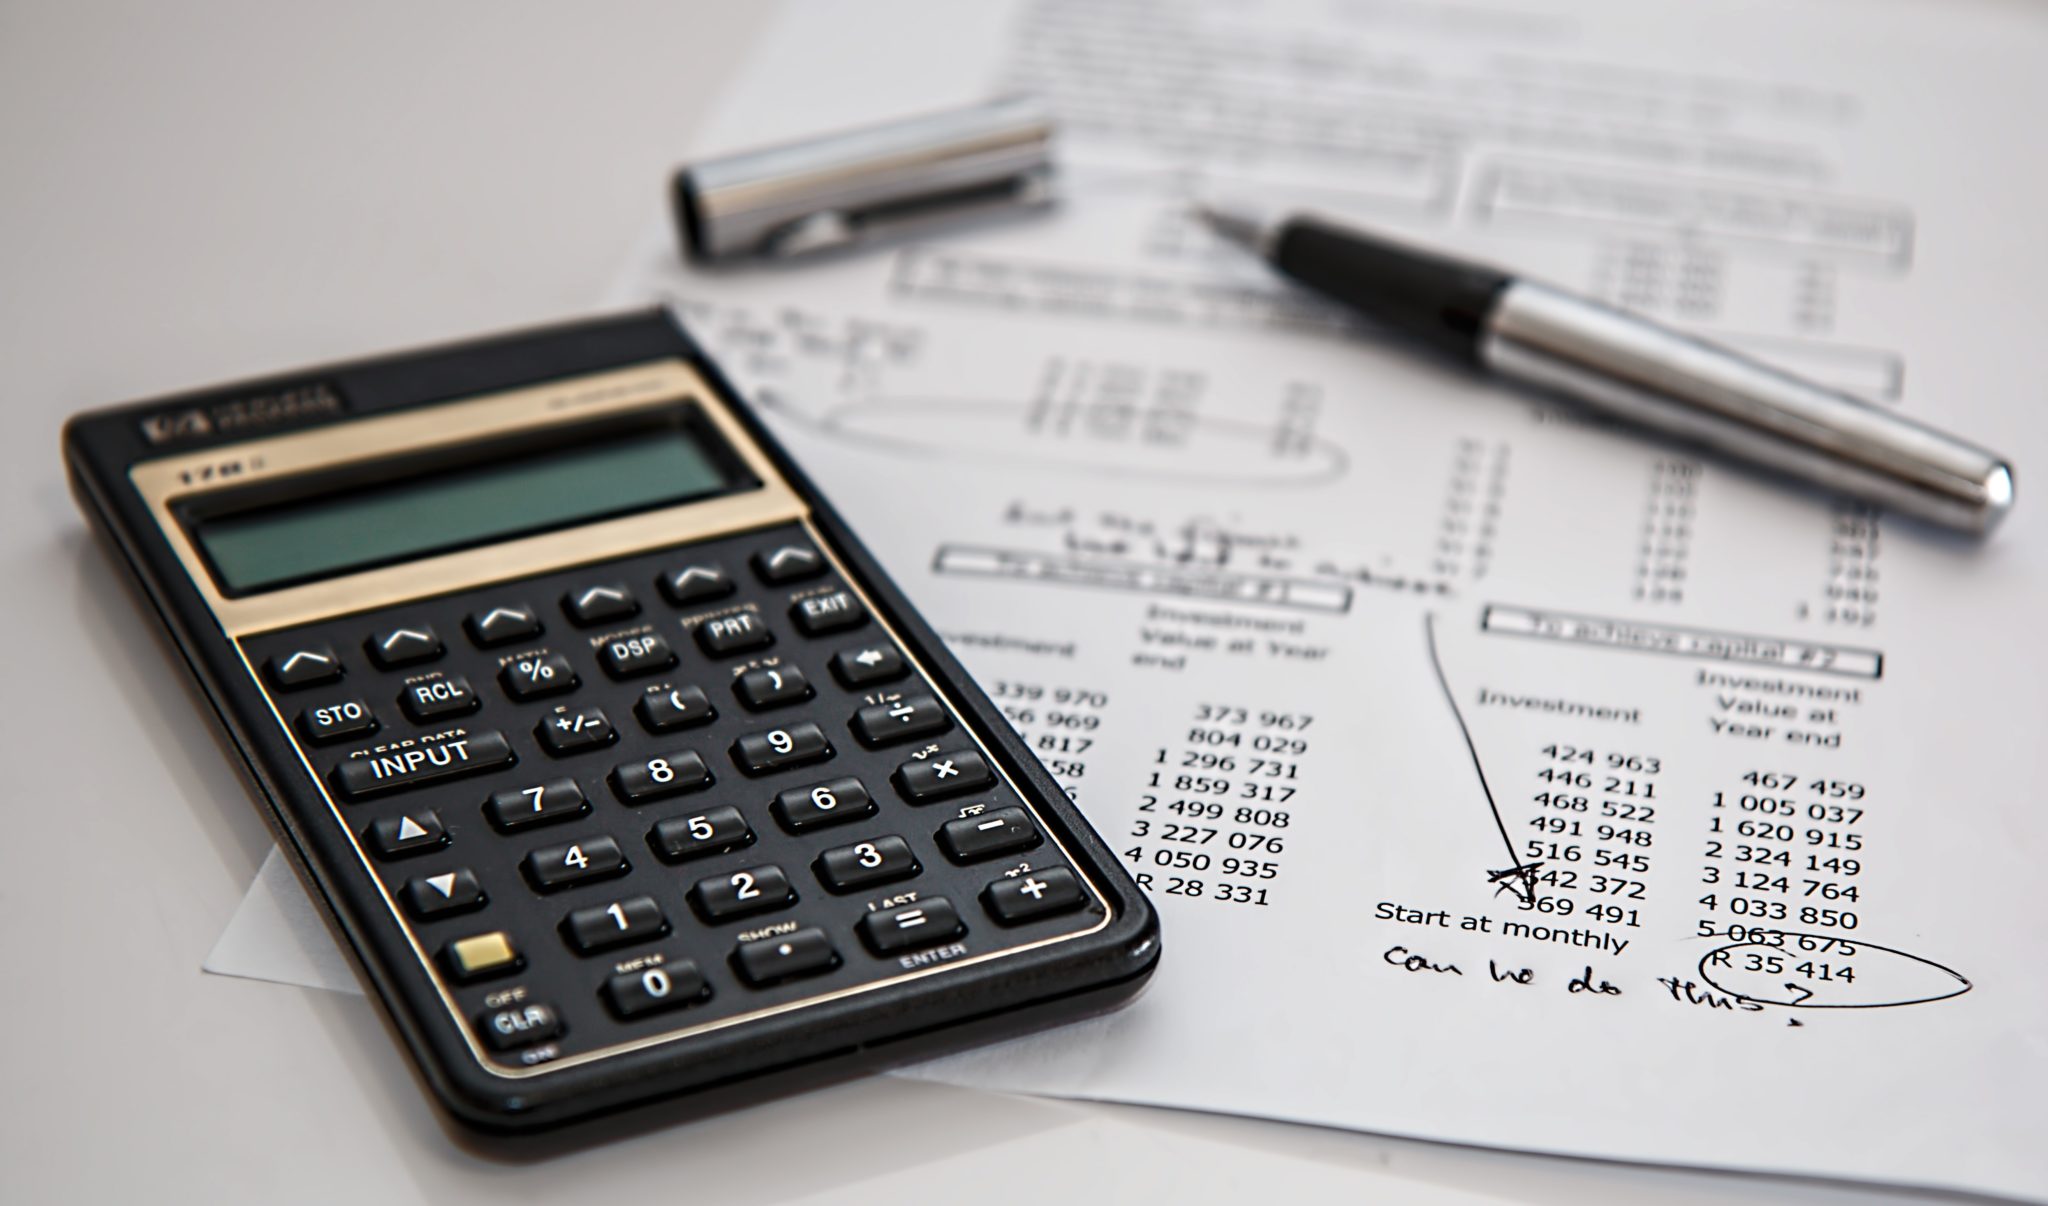 Photo of a calculator on top of financial documents, balancing totals.